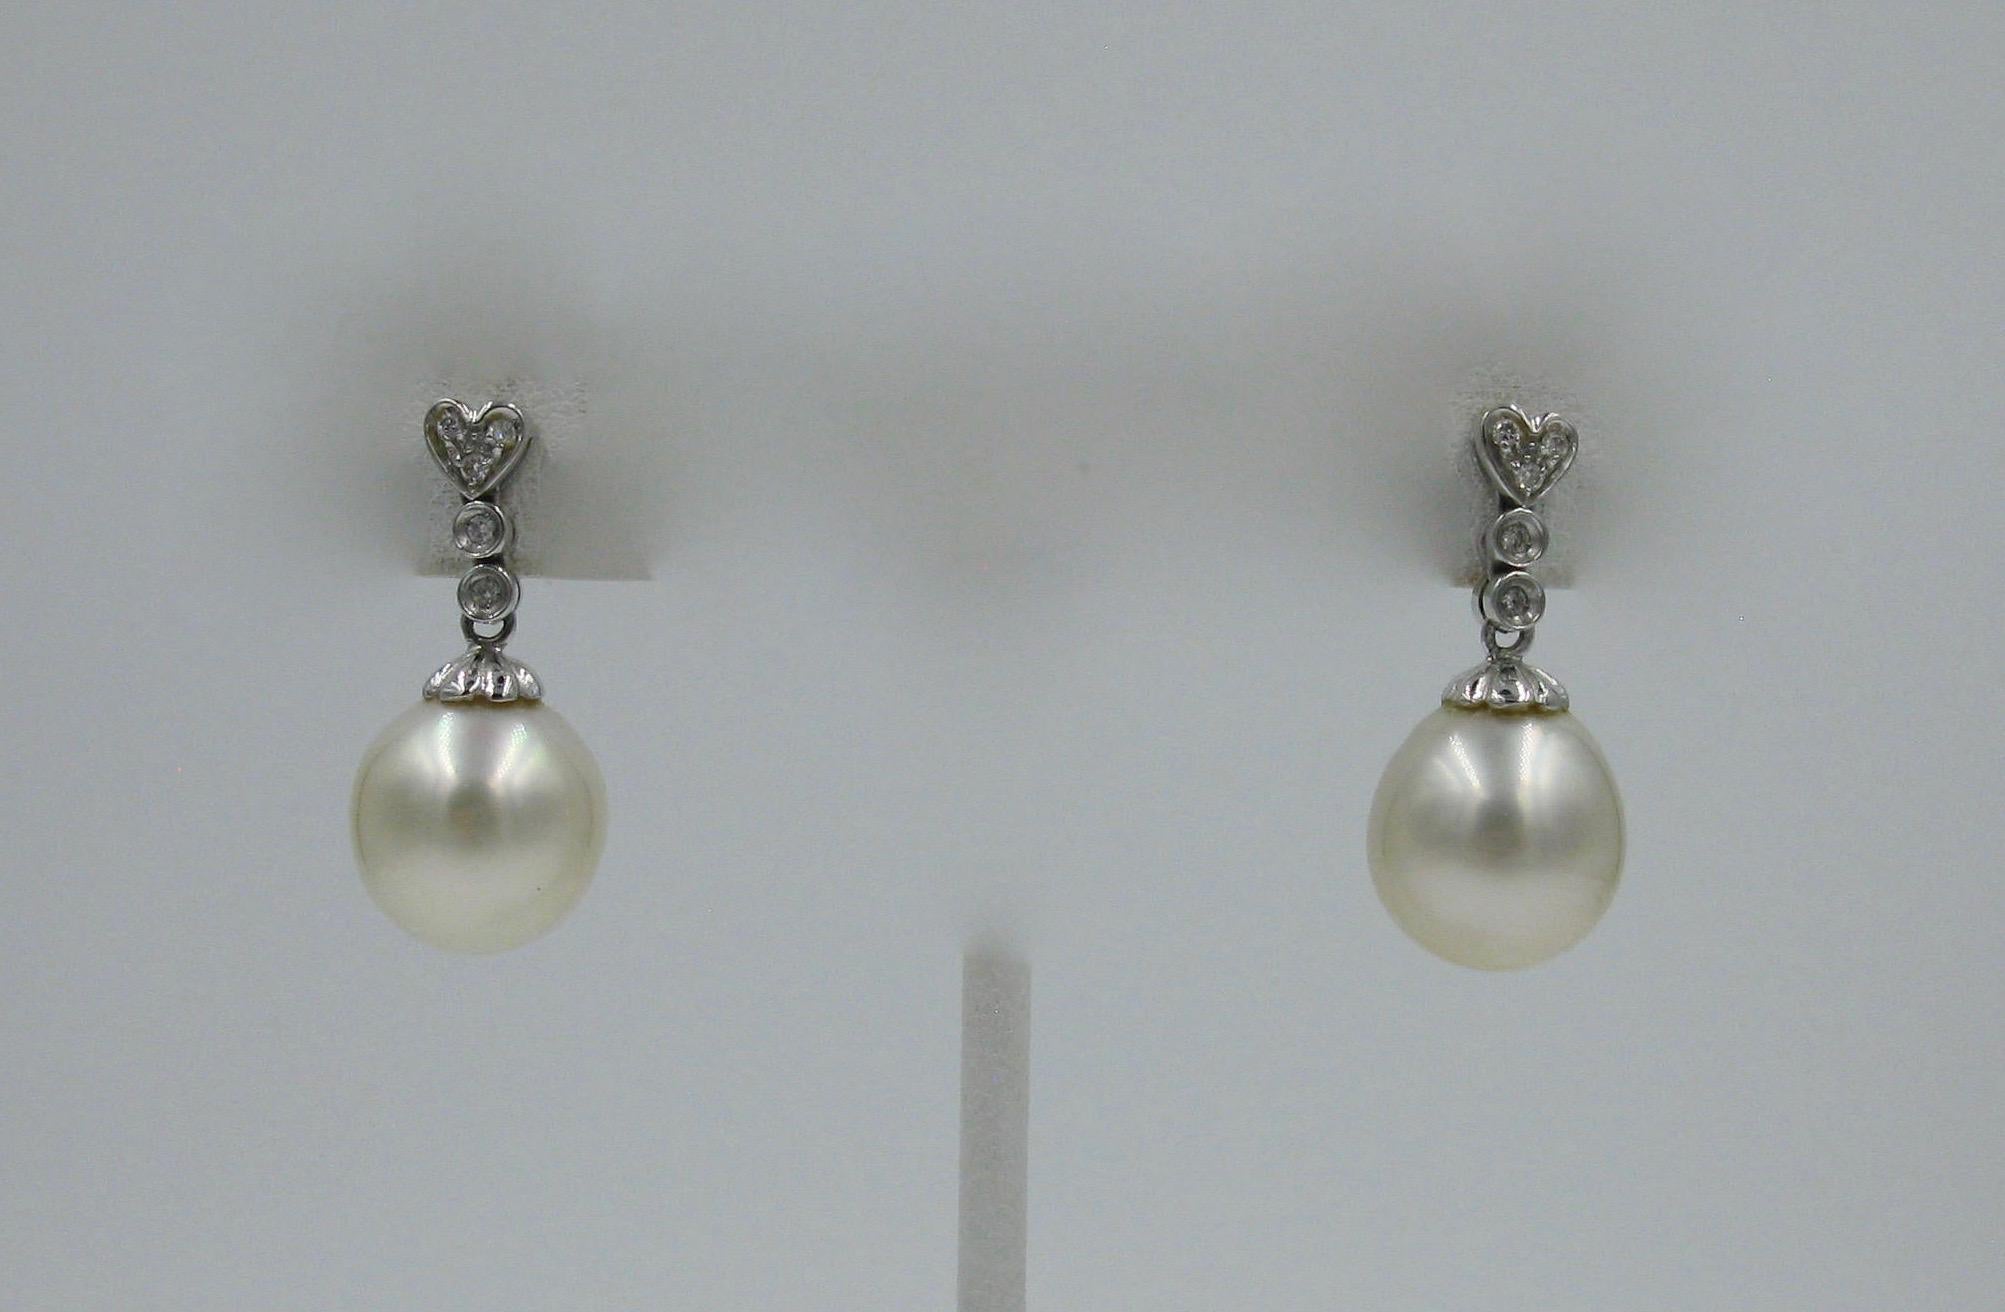 AN EXTRAORDINARY PAIR OF 13 MM SOUTH SEA PEARL AND DIAMOND EARRINGS IN 14K GOLD
The South Sea pearls are 13 mm and 12.5 mm.  The pearls hang from a ribbon of diamonds with a heart motif at the top.  The jewels are set in 14K white gold.
PEARLS
13 mm